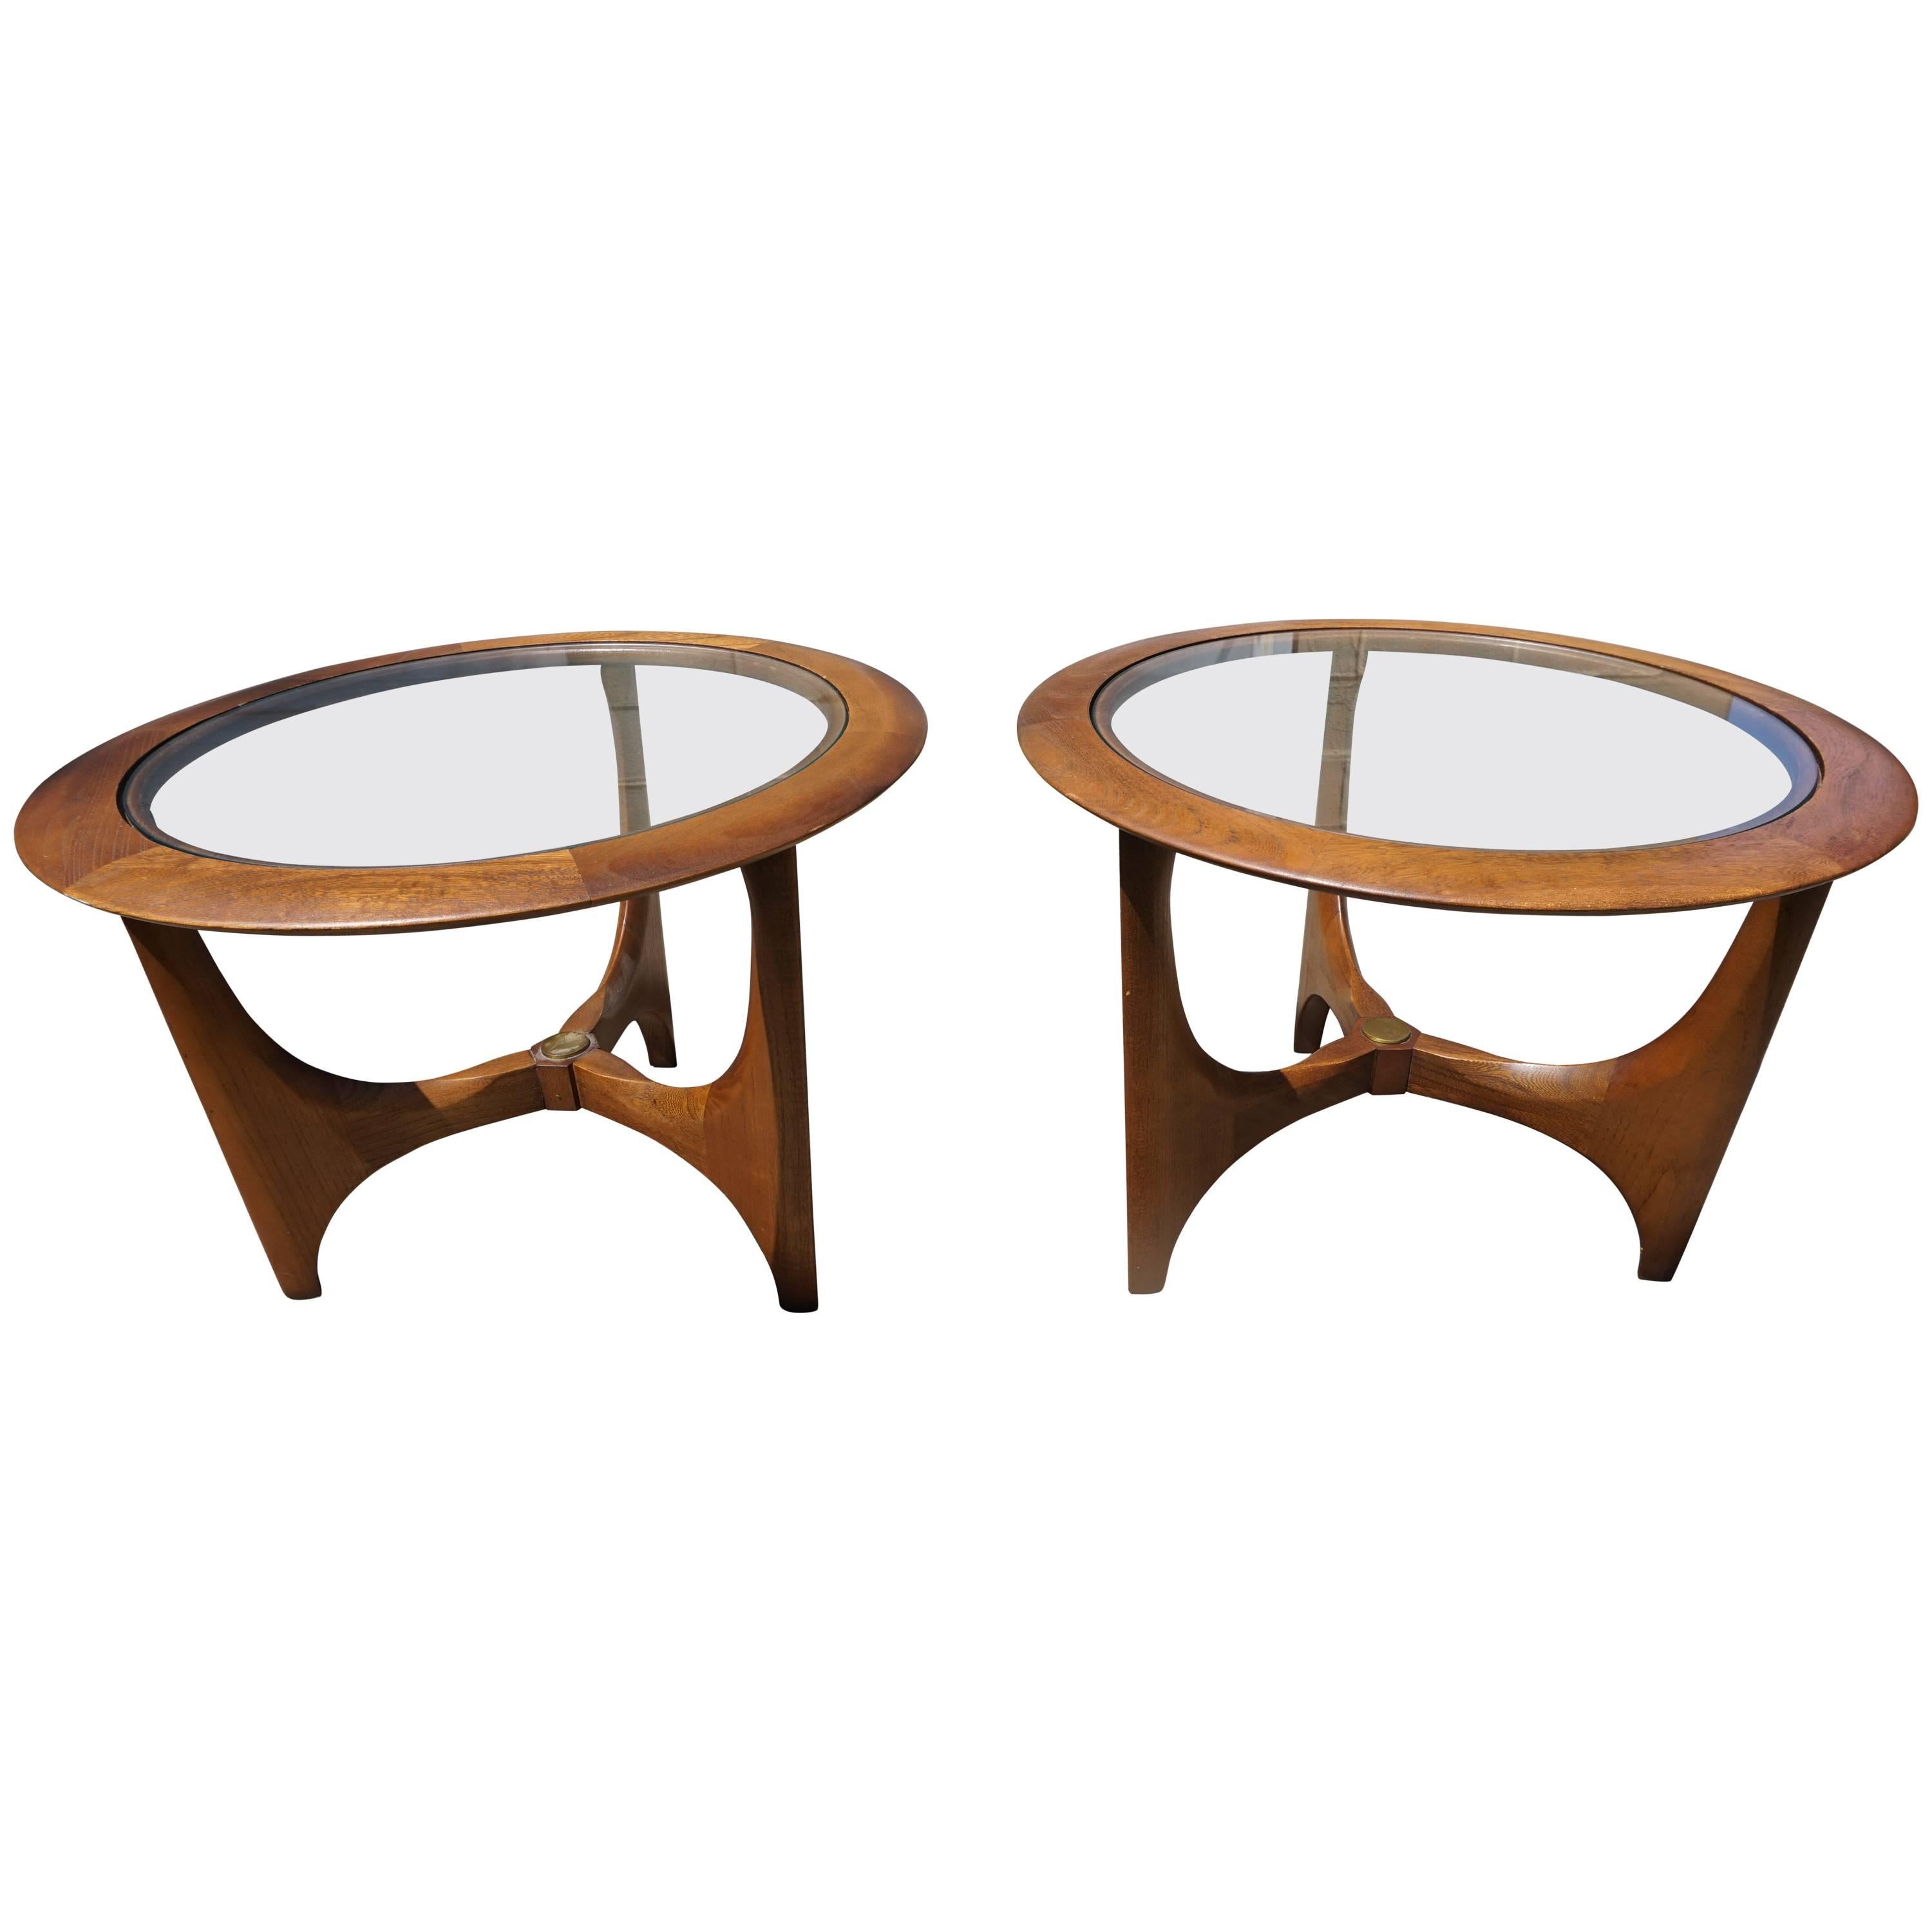 Pair of Mid-Century Modern Walnut Glass Round Side Tables, Made by Lane